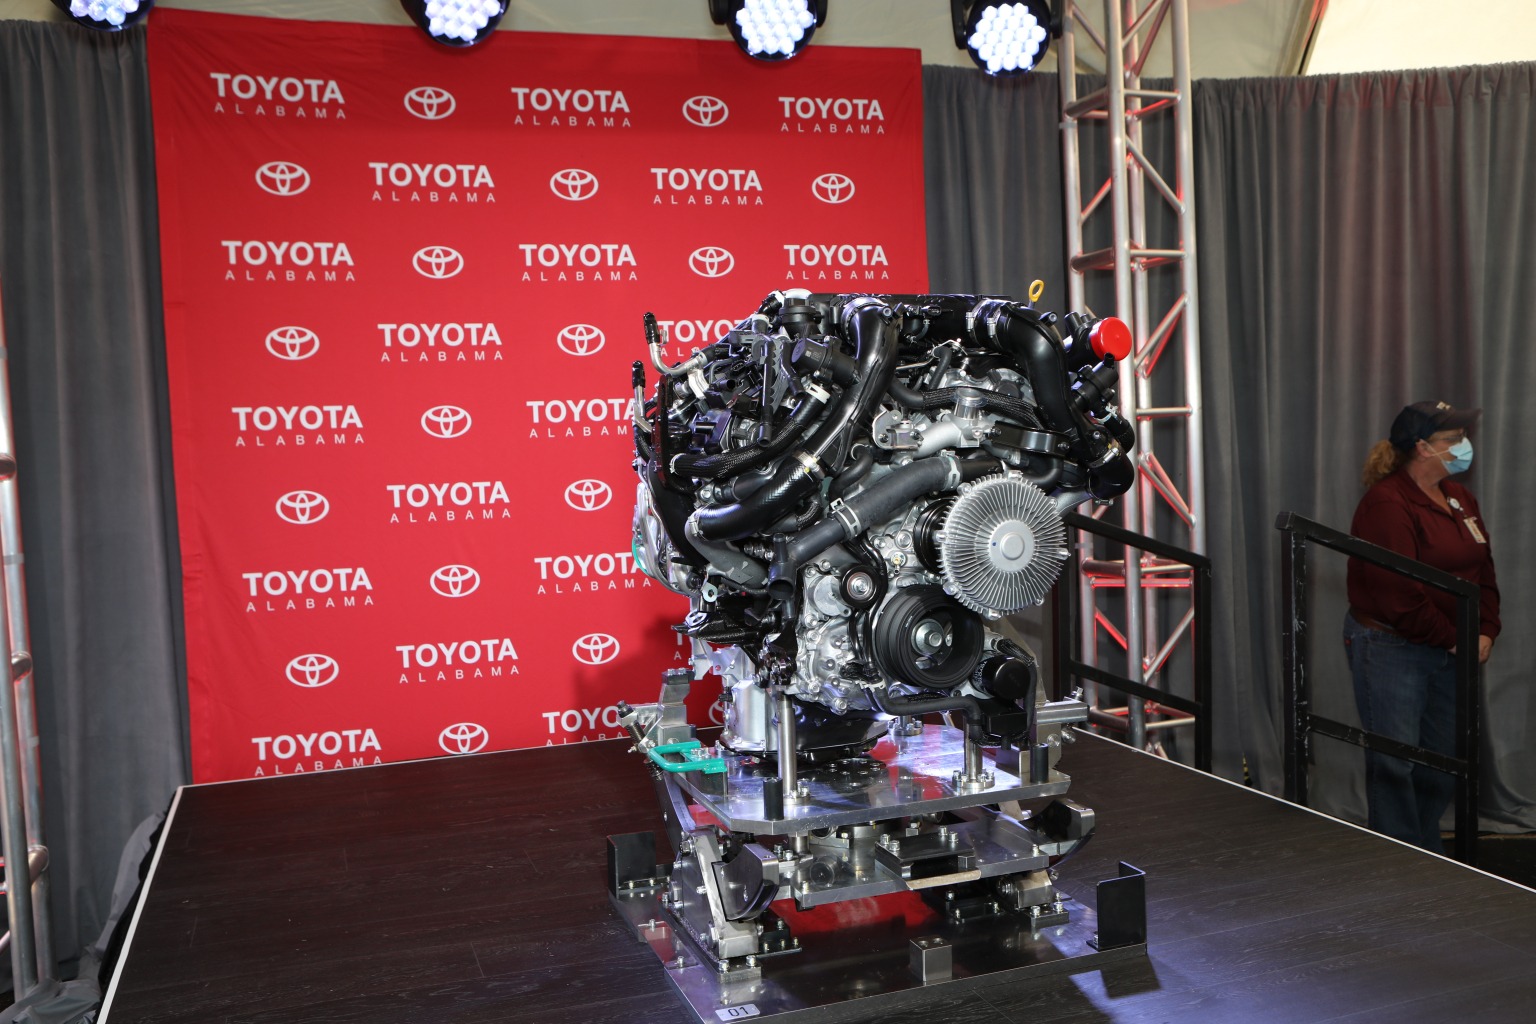 Toyotas Iforce Twin Turbo V6 Engine Got Some Motors Running At Toyota